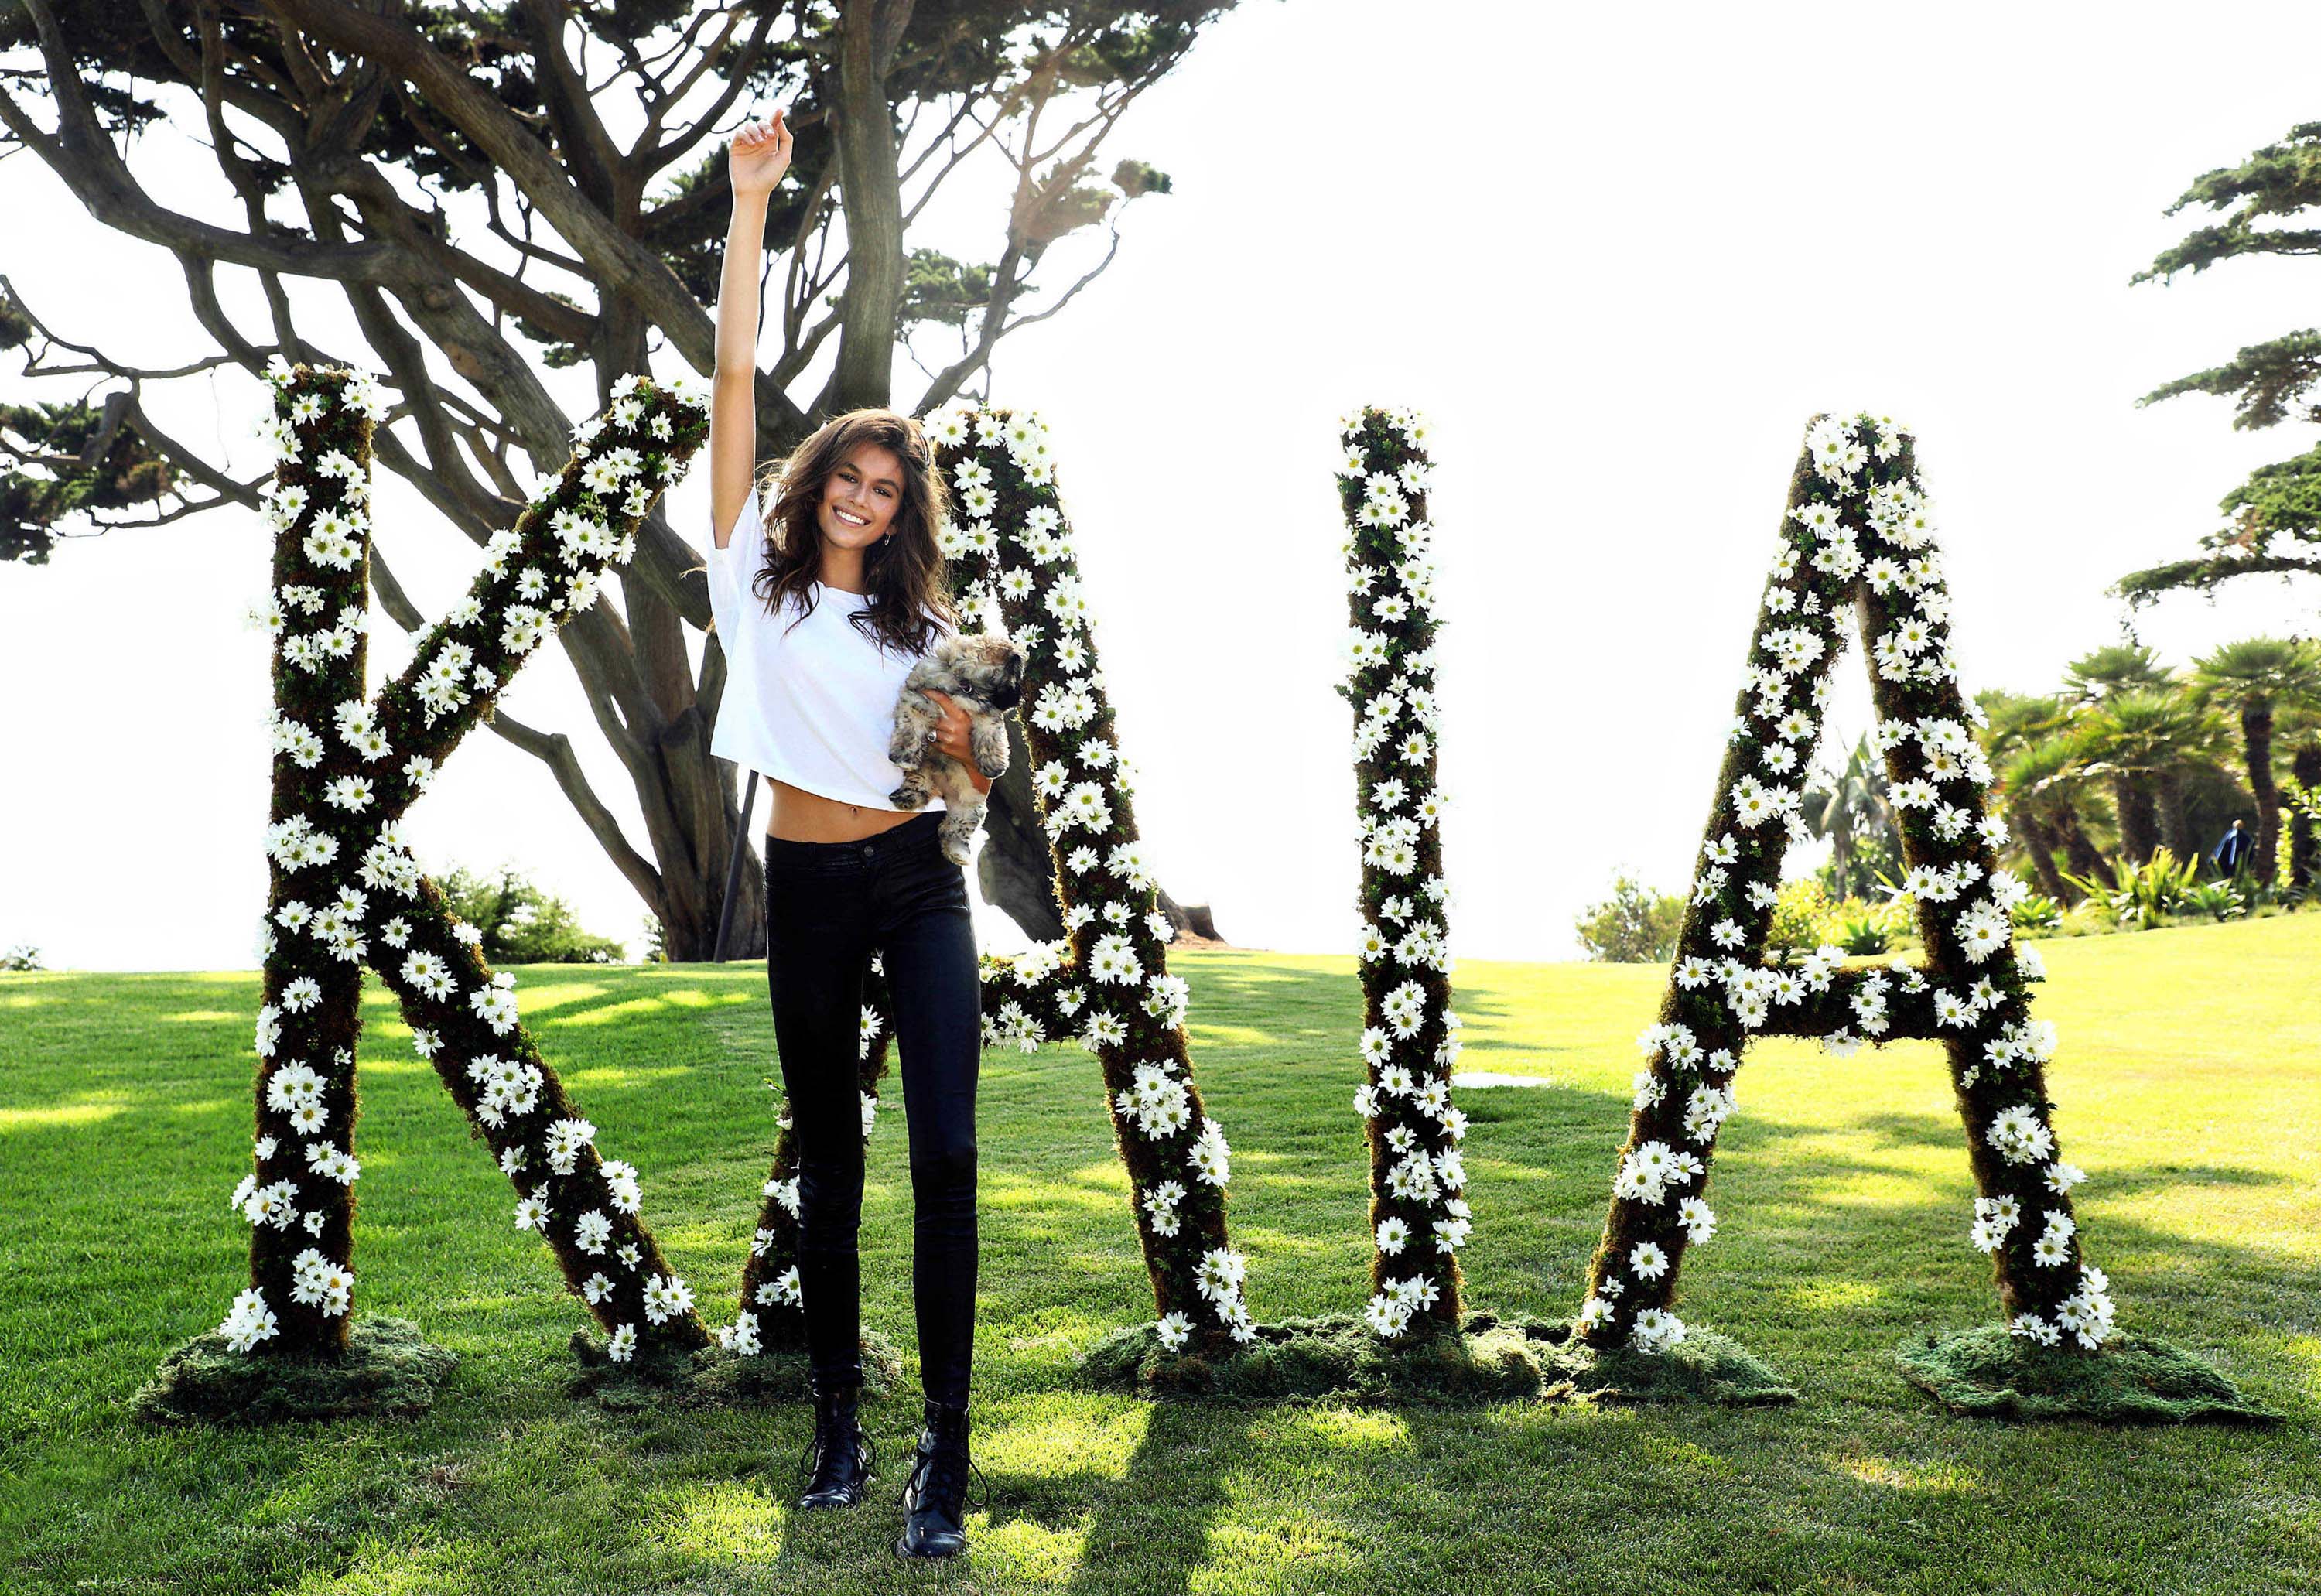 Kaia Gerber seen at a photoshoot for her birthday